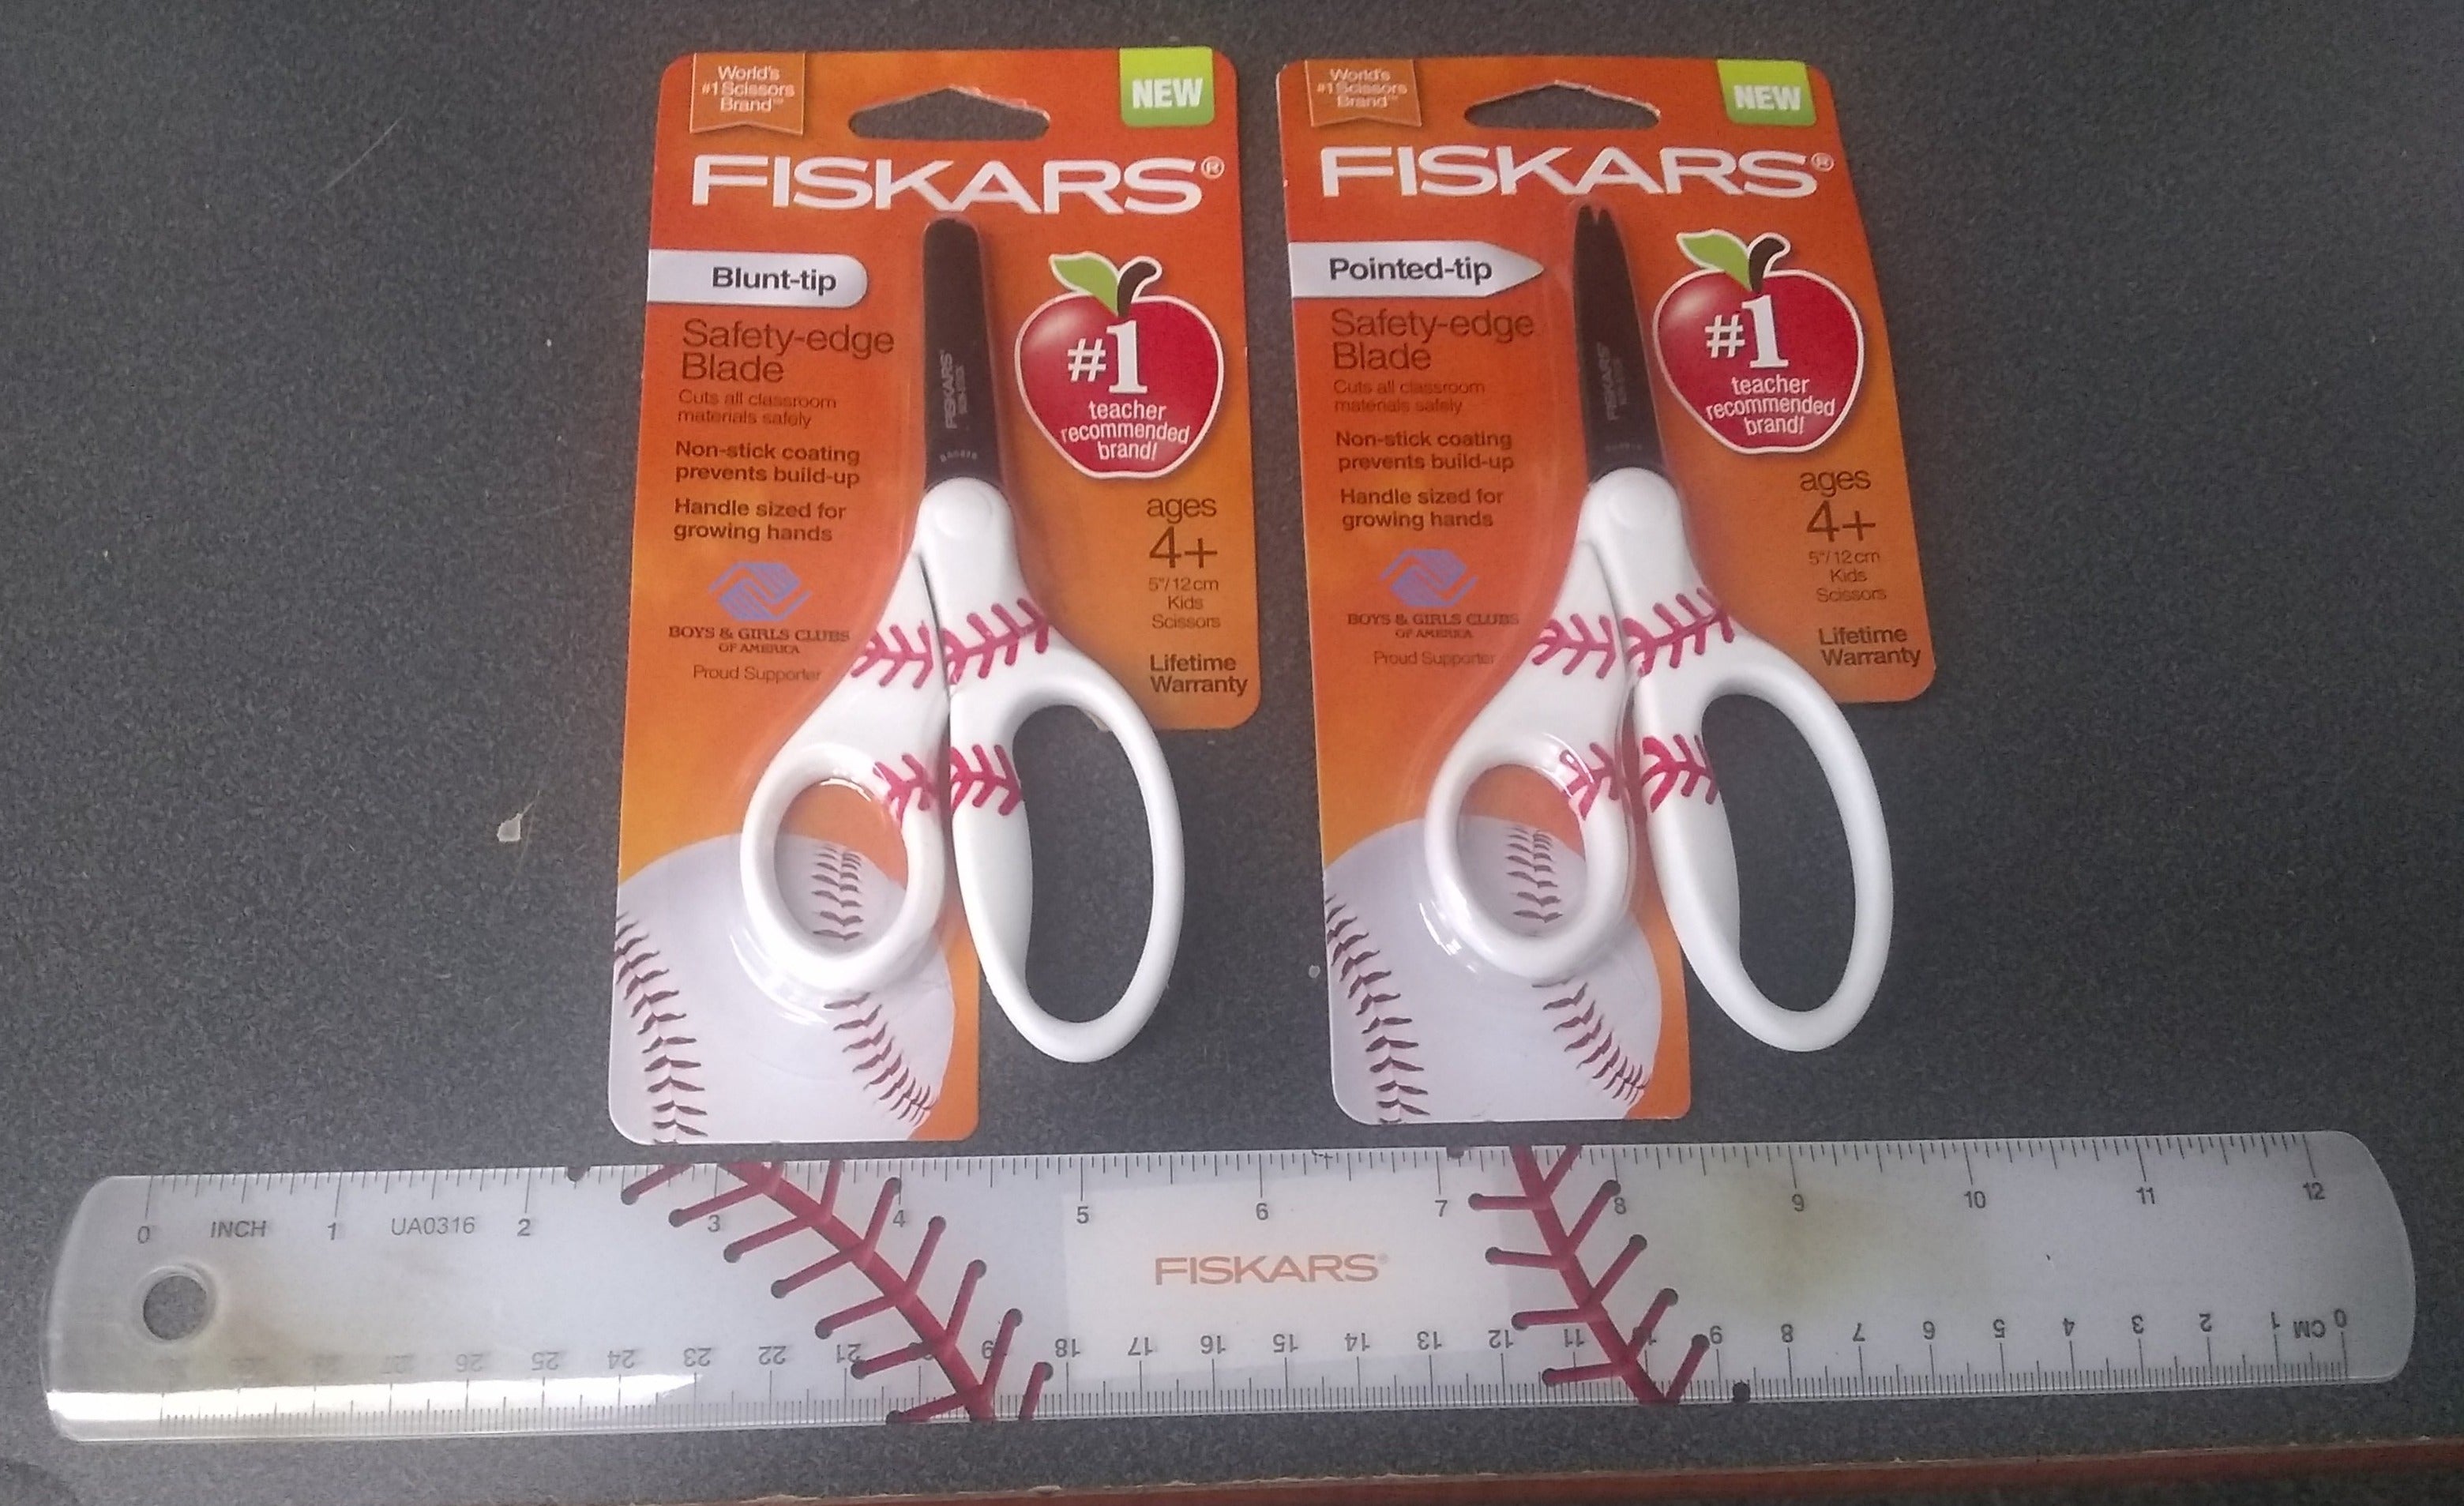 Fiskars 5 Inch Pointed Tip Kids Scissors Classroom Pack Caddy, Pack of 24